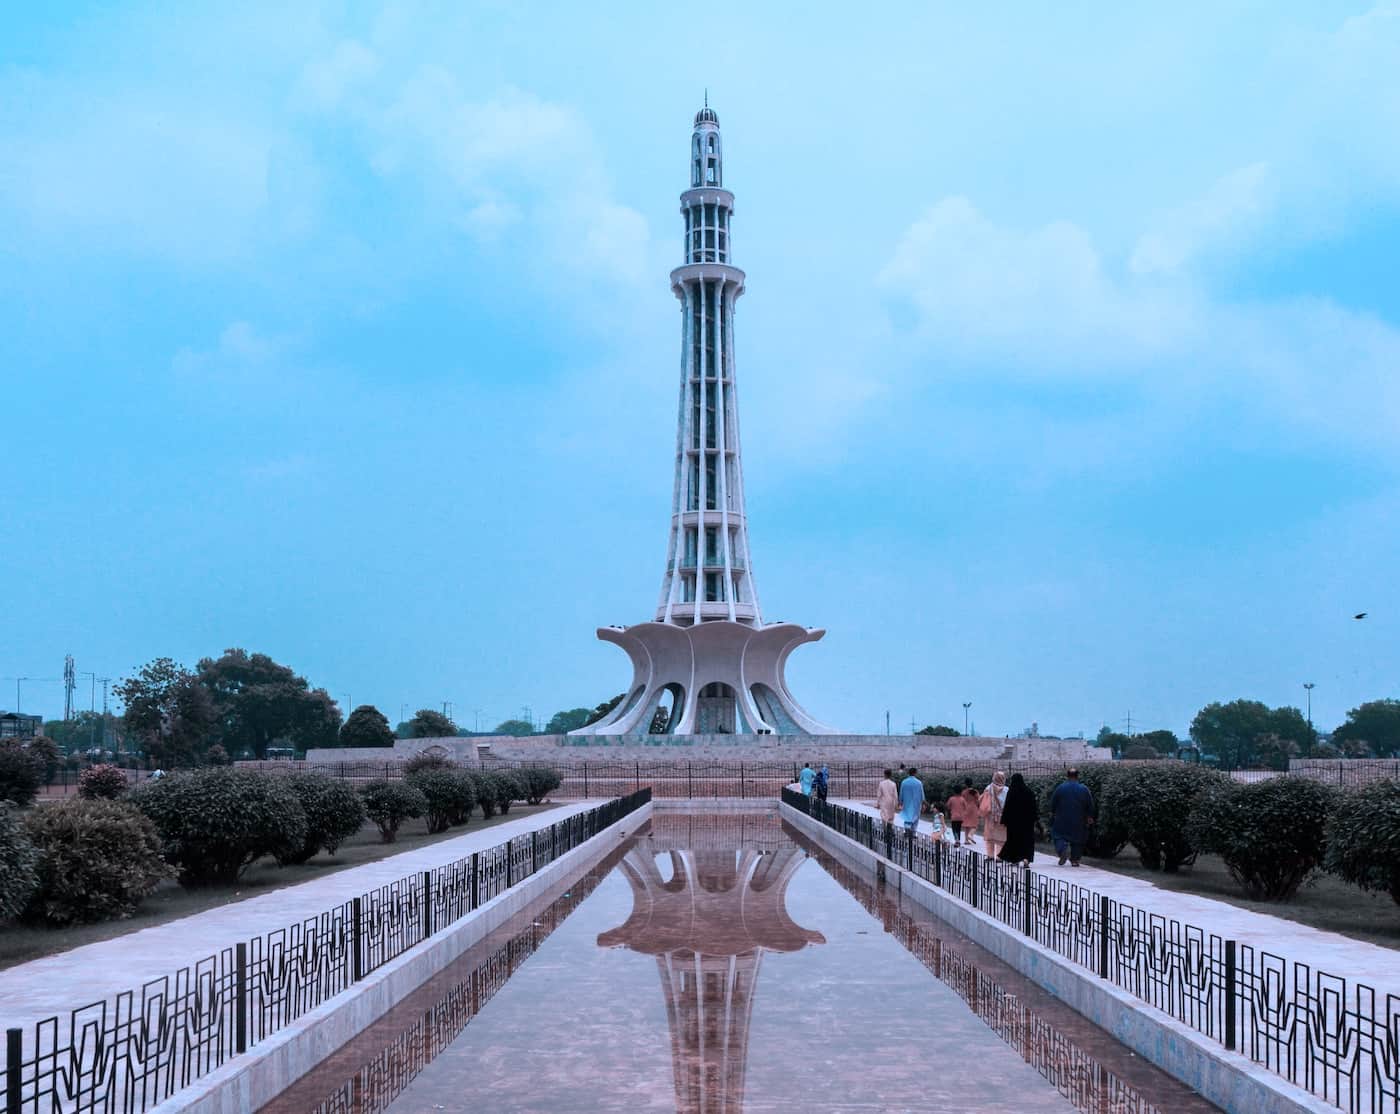 CBDCs: Pakistan Is Reportedly Exploring The Feasibility Of Launching A Digital Currency | Crowdfund Insider